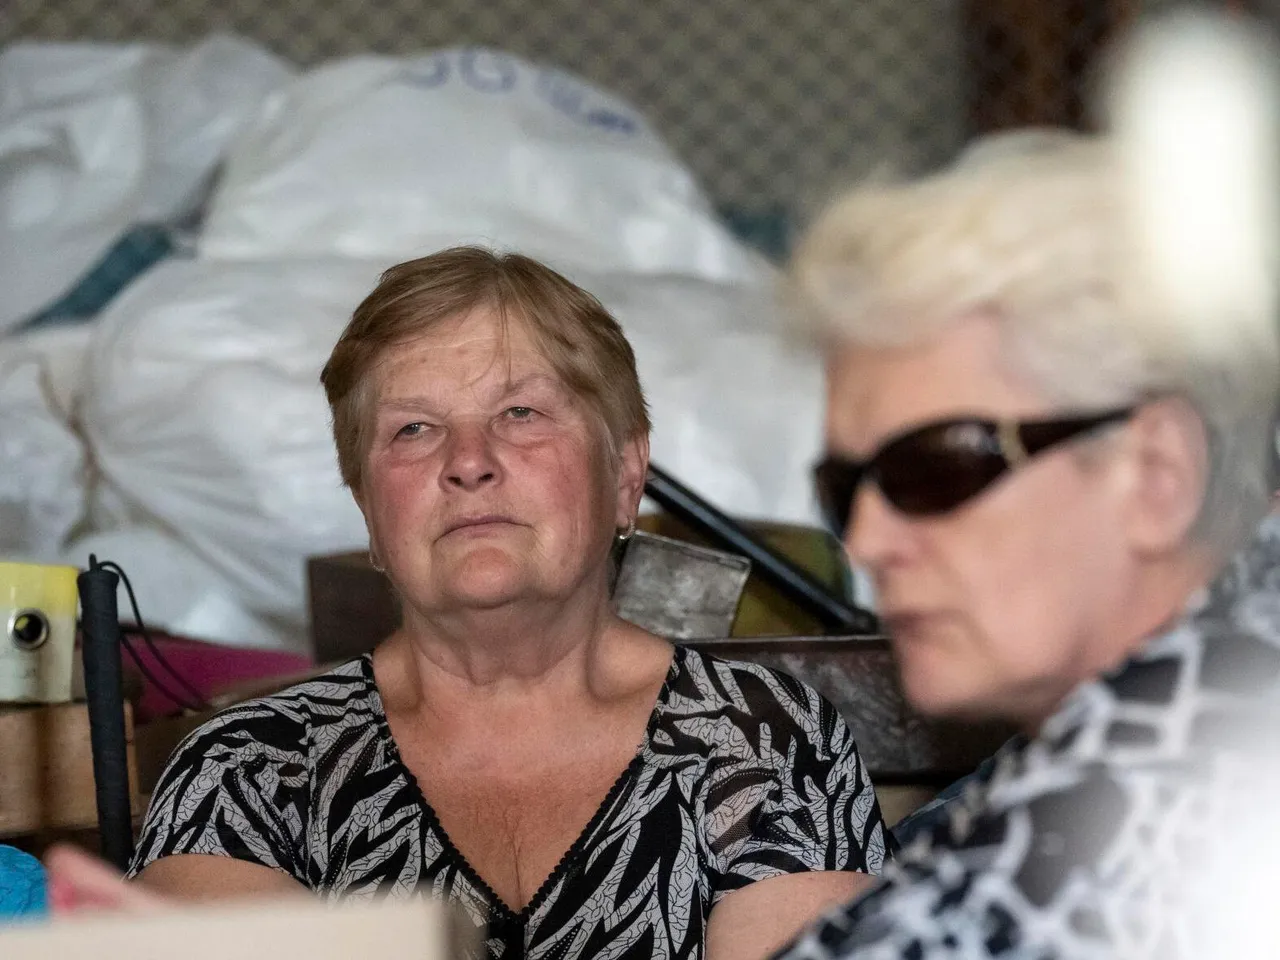 Visually impaired people in Ukraine struggle to cope during Russian missile attacks